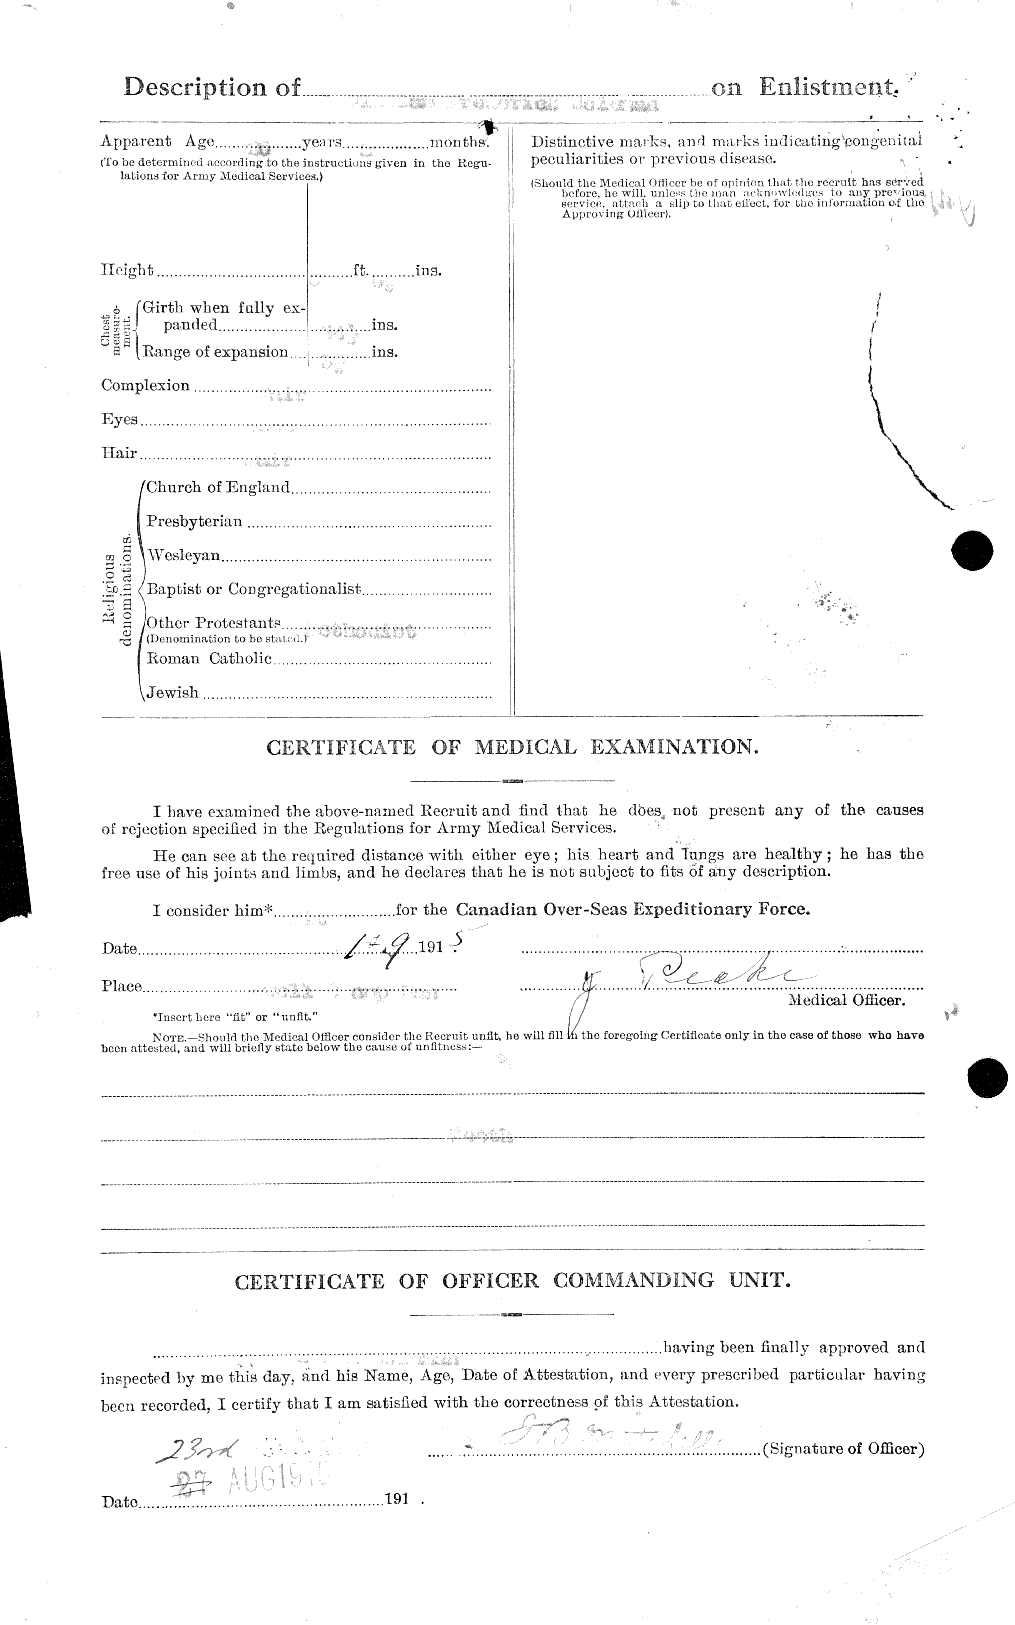 Personnel Records of the First World War - CEF 028310b